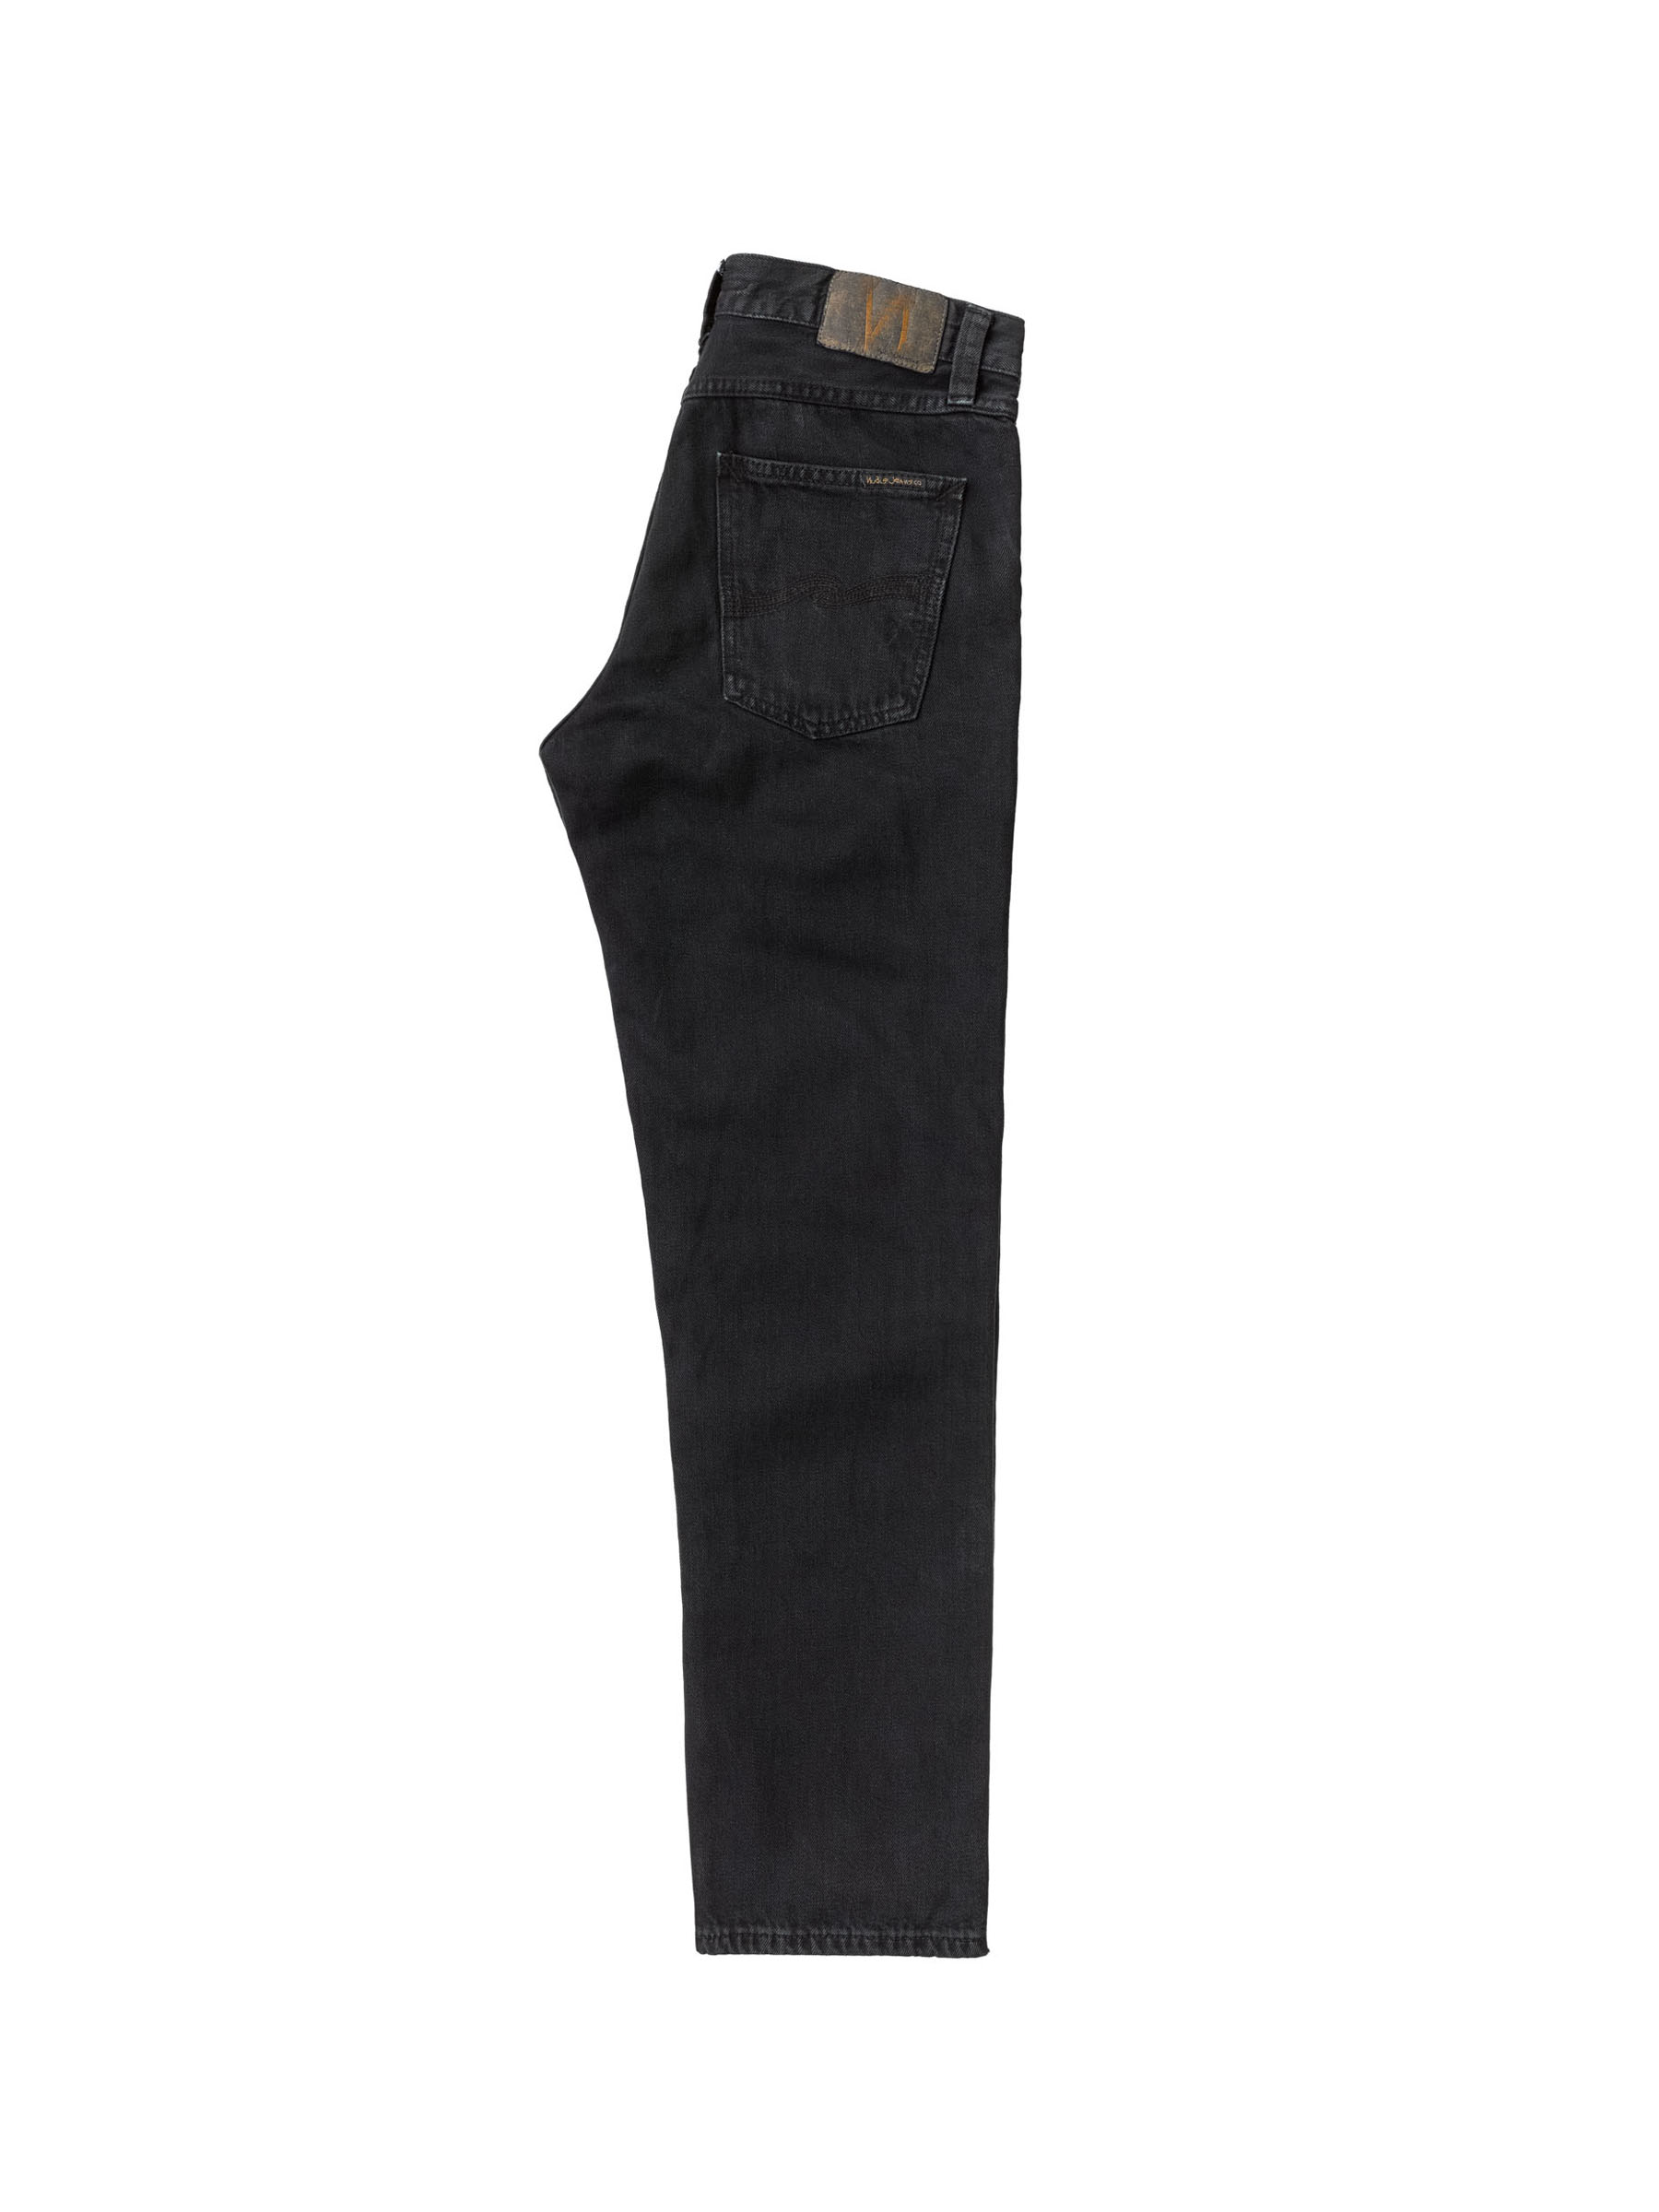 Nudie Jeans - GRITTY JACKSON - Black Forest